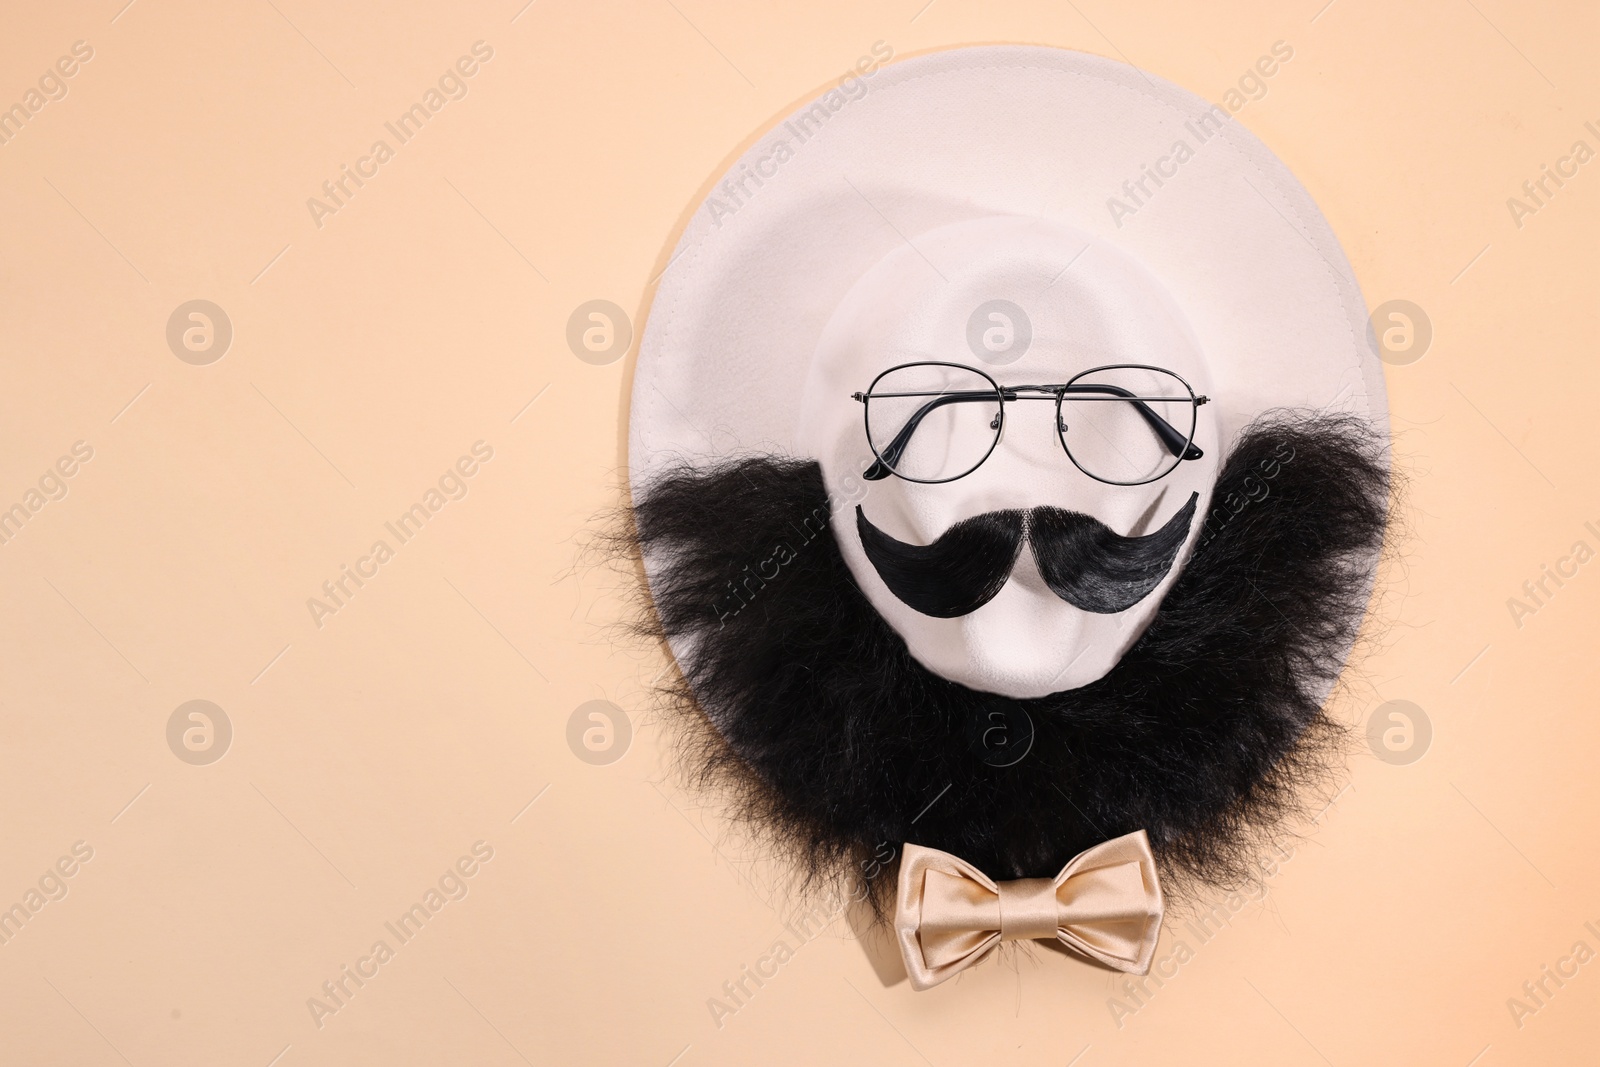 Photo of Man's face made of artificial mustache, beard and glasses on beige background, top view. Space for text